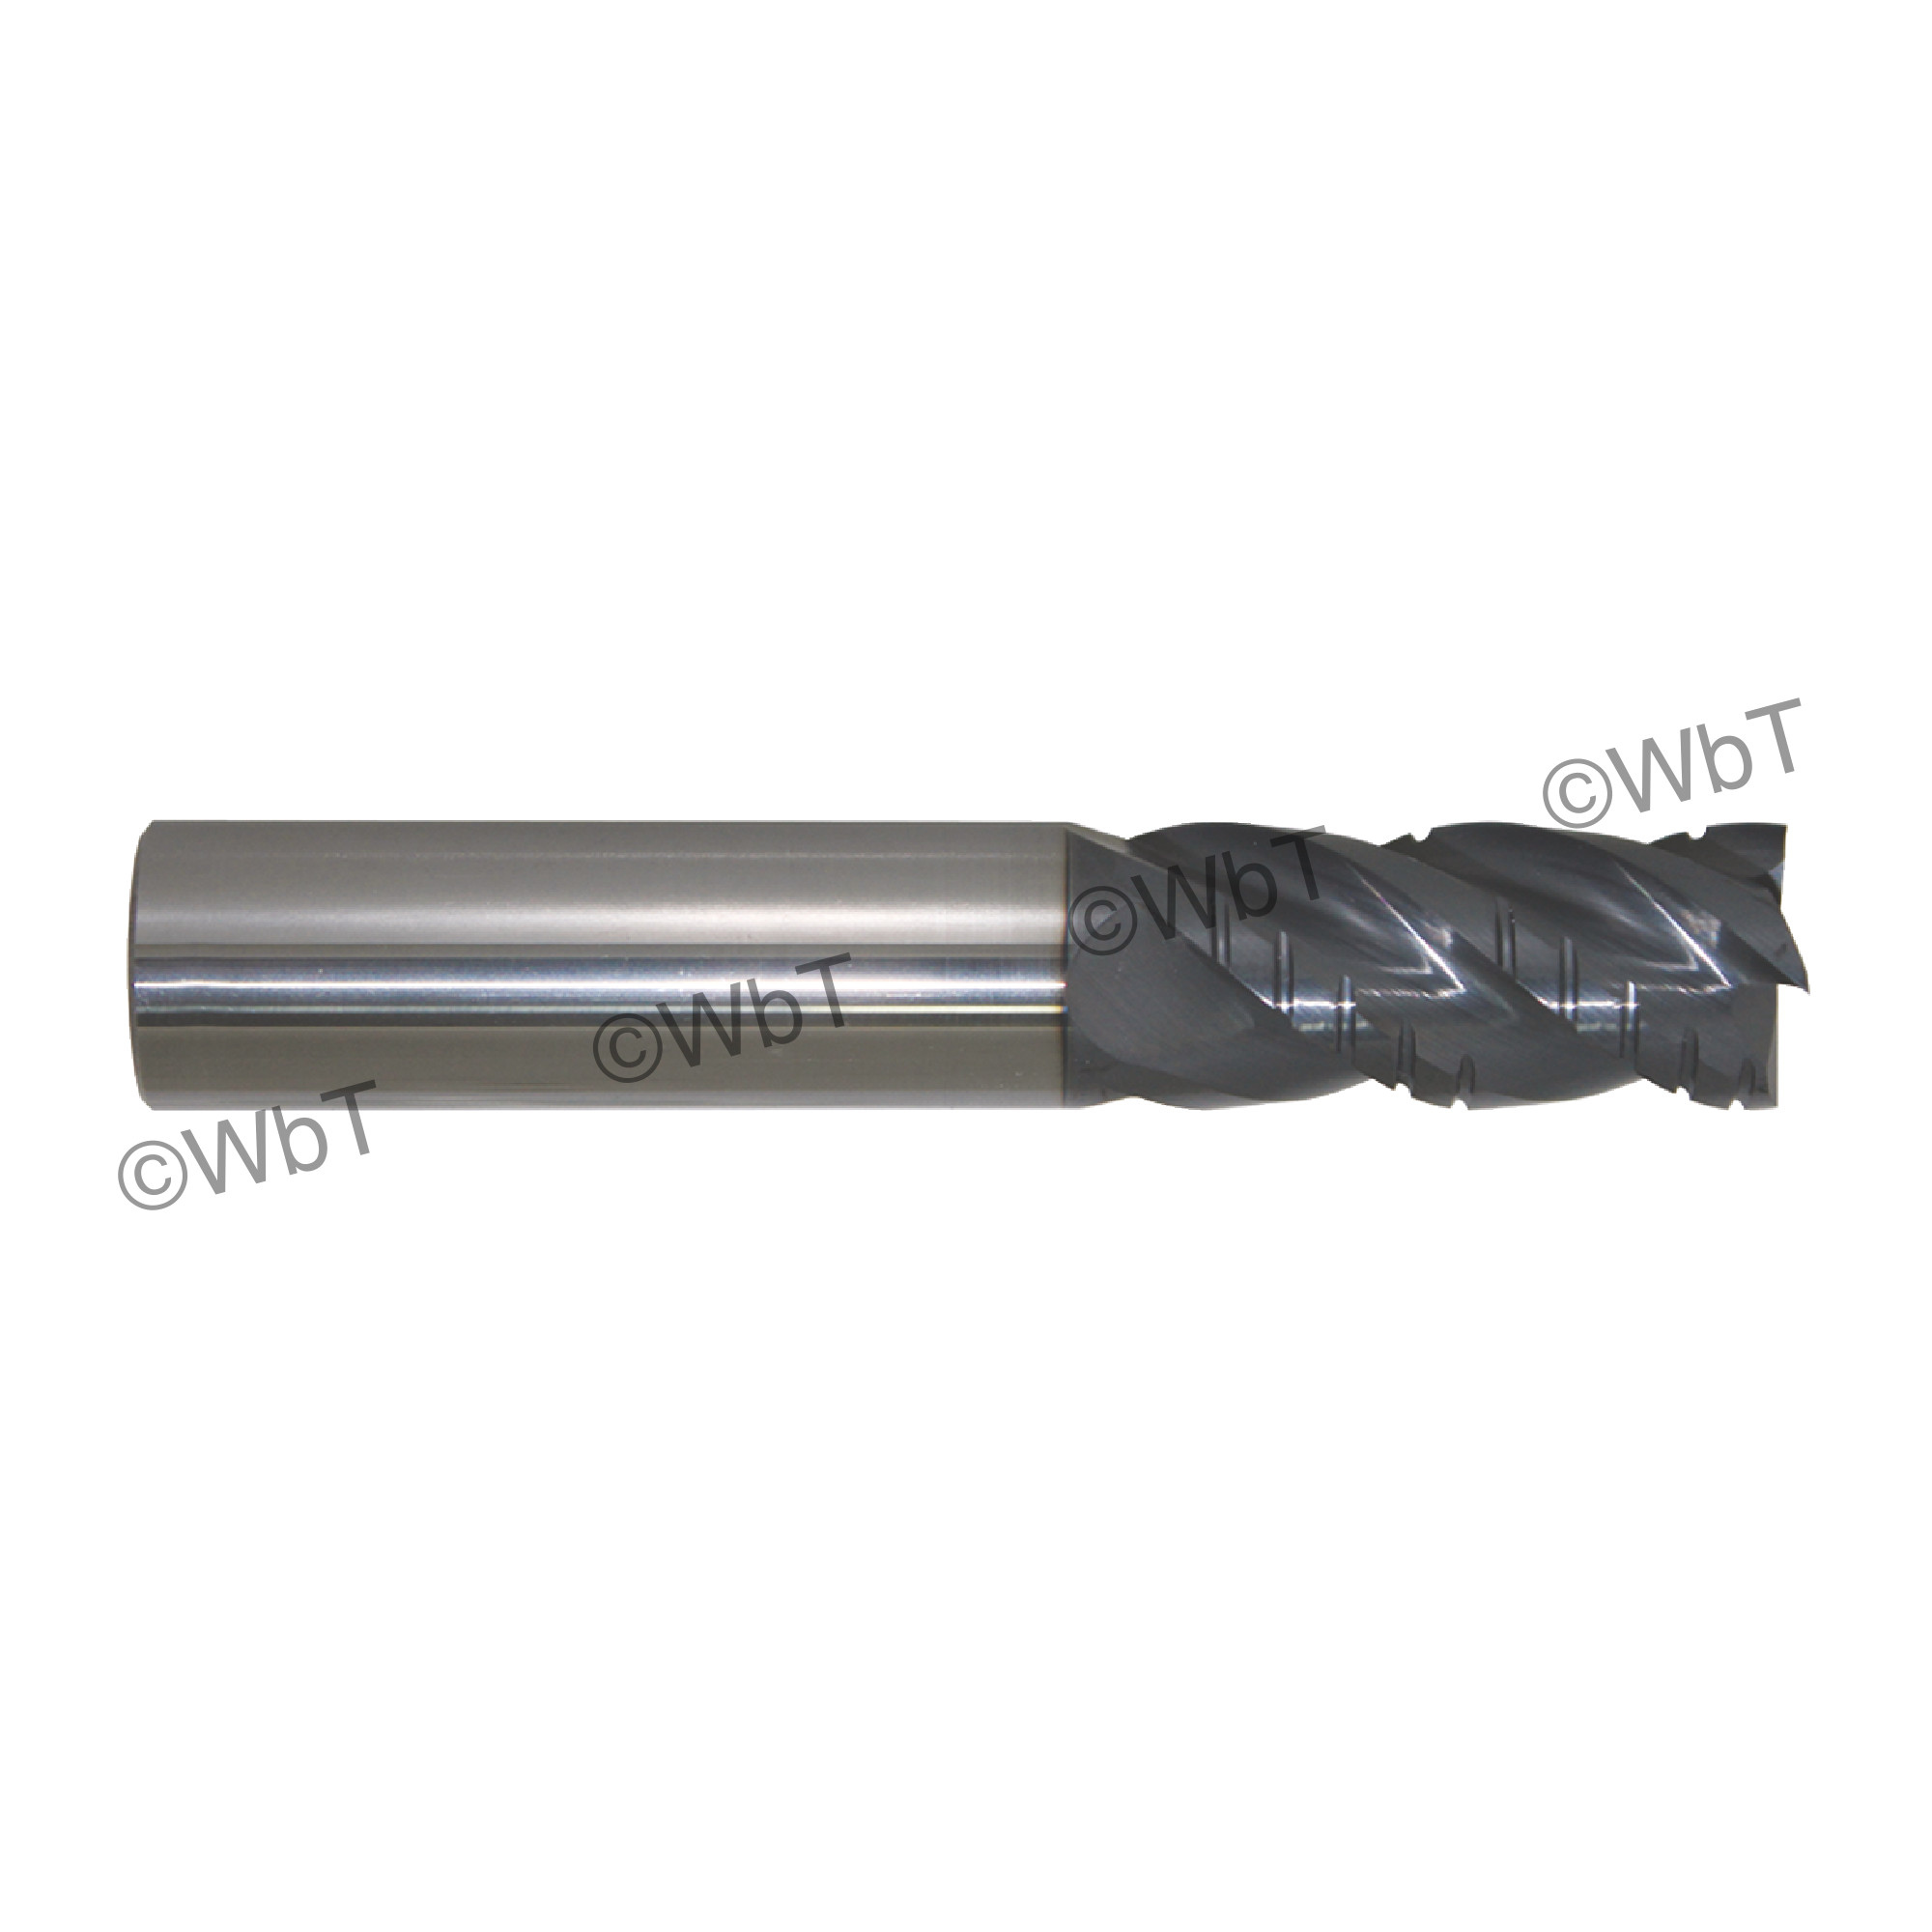 PRO-4 4 Flute Solid Carbide Harmonic Reduction AITiN Coated End Mills